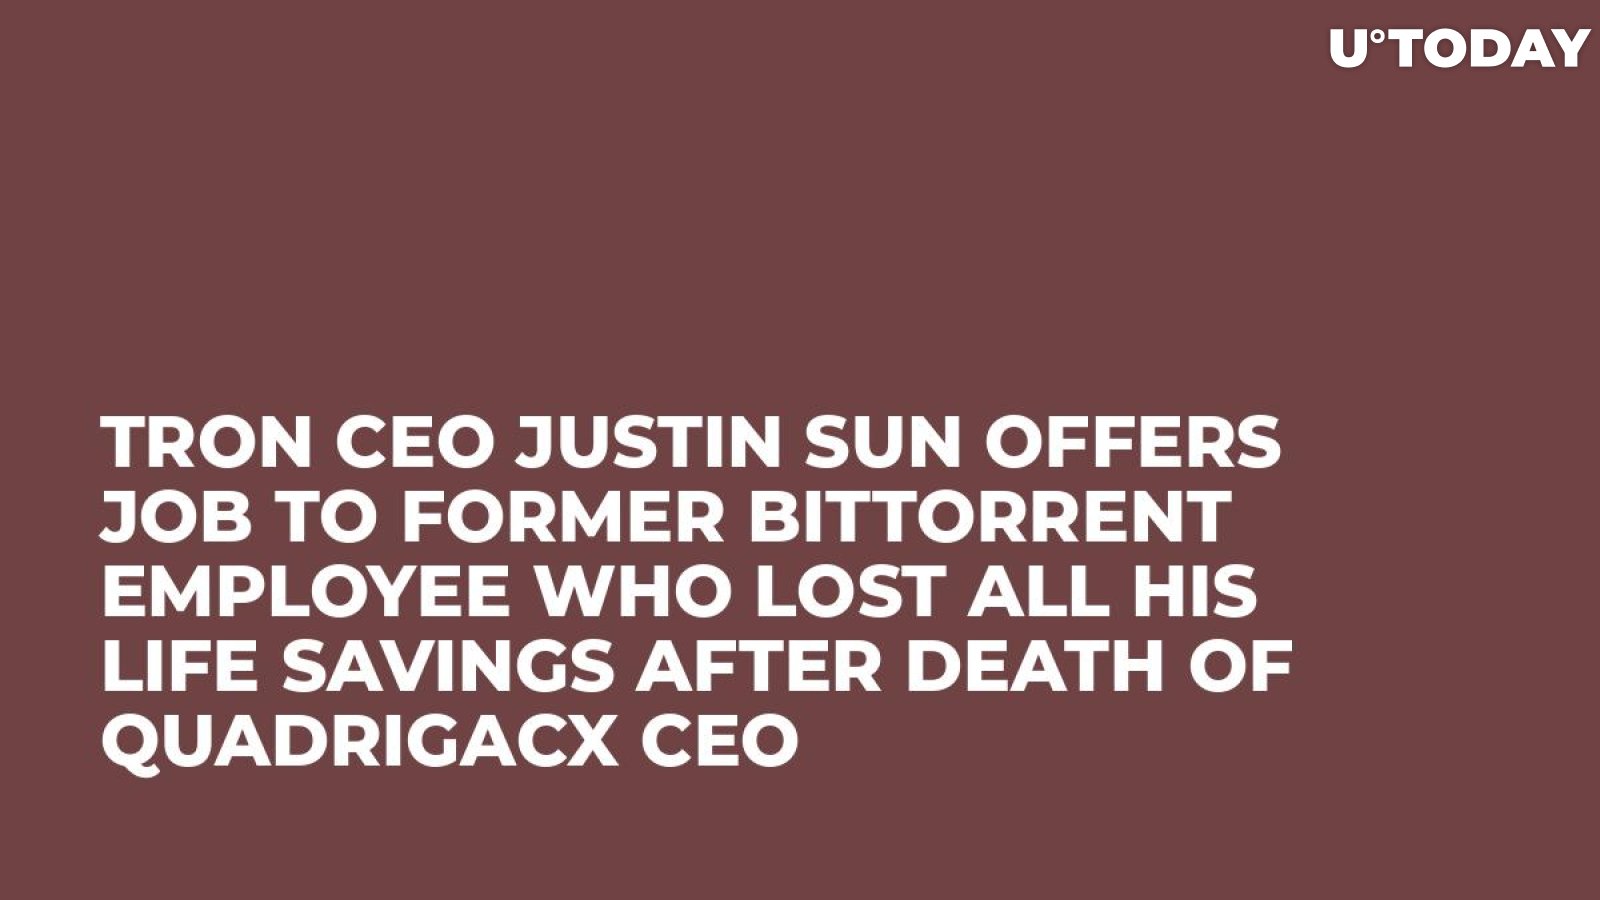 Tron CEO Justin Sun Offers Job to Former BitTorrent Employee Who Lost All His Life Savings After Death of QuadrigaCX CEO